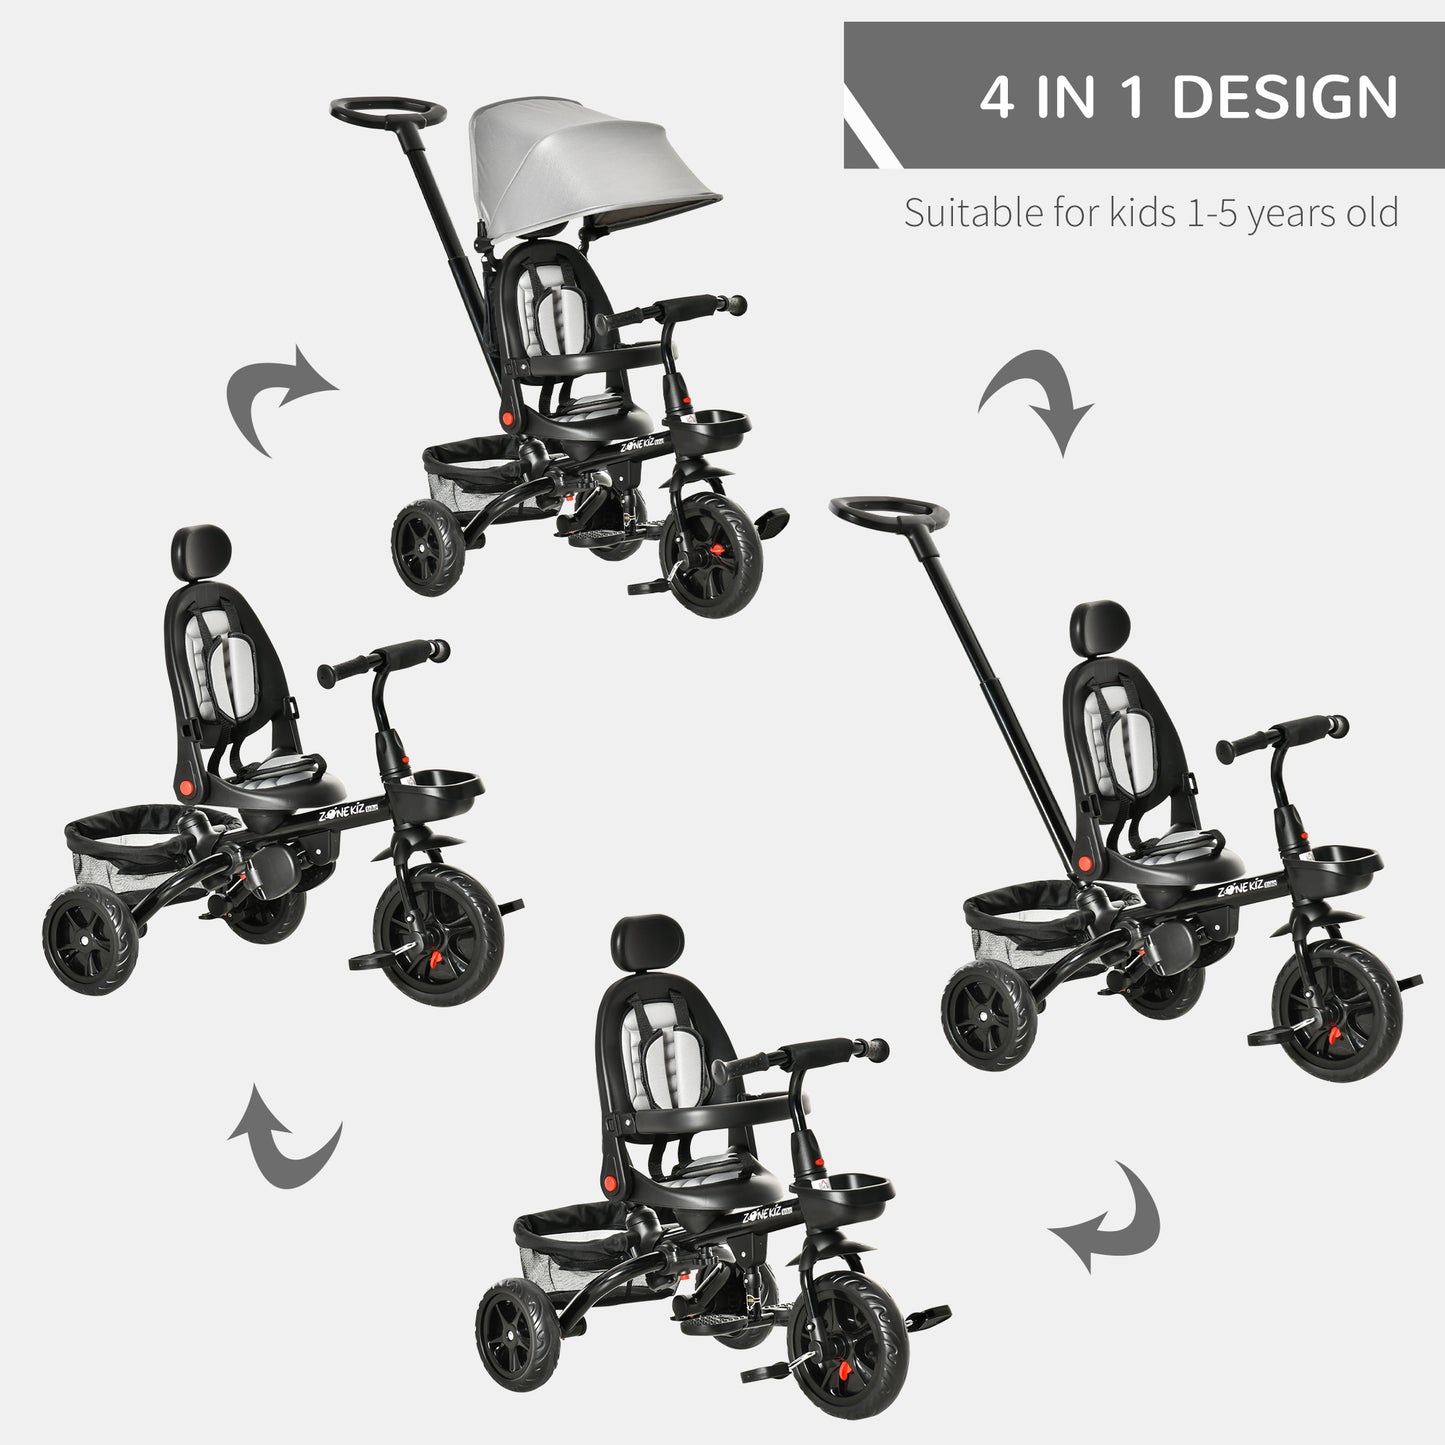 HOMCOM 4 in 1 Baby Tricycle Toddler Stroller Foldable Pedal Tricycle w/ Reversible Angle Adjustable Seat Removable for 1-5 Years - Grey